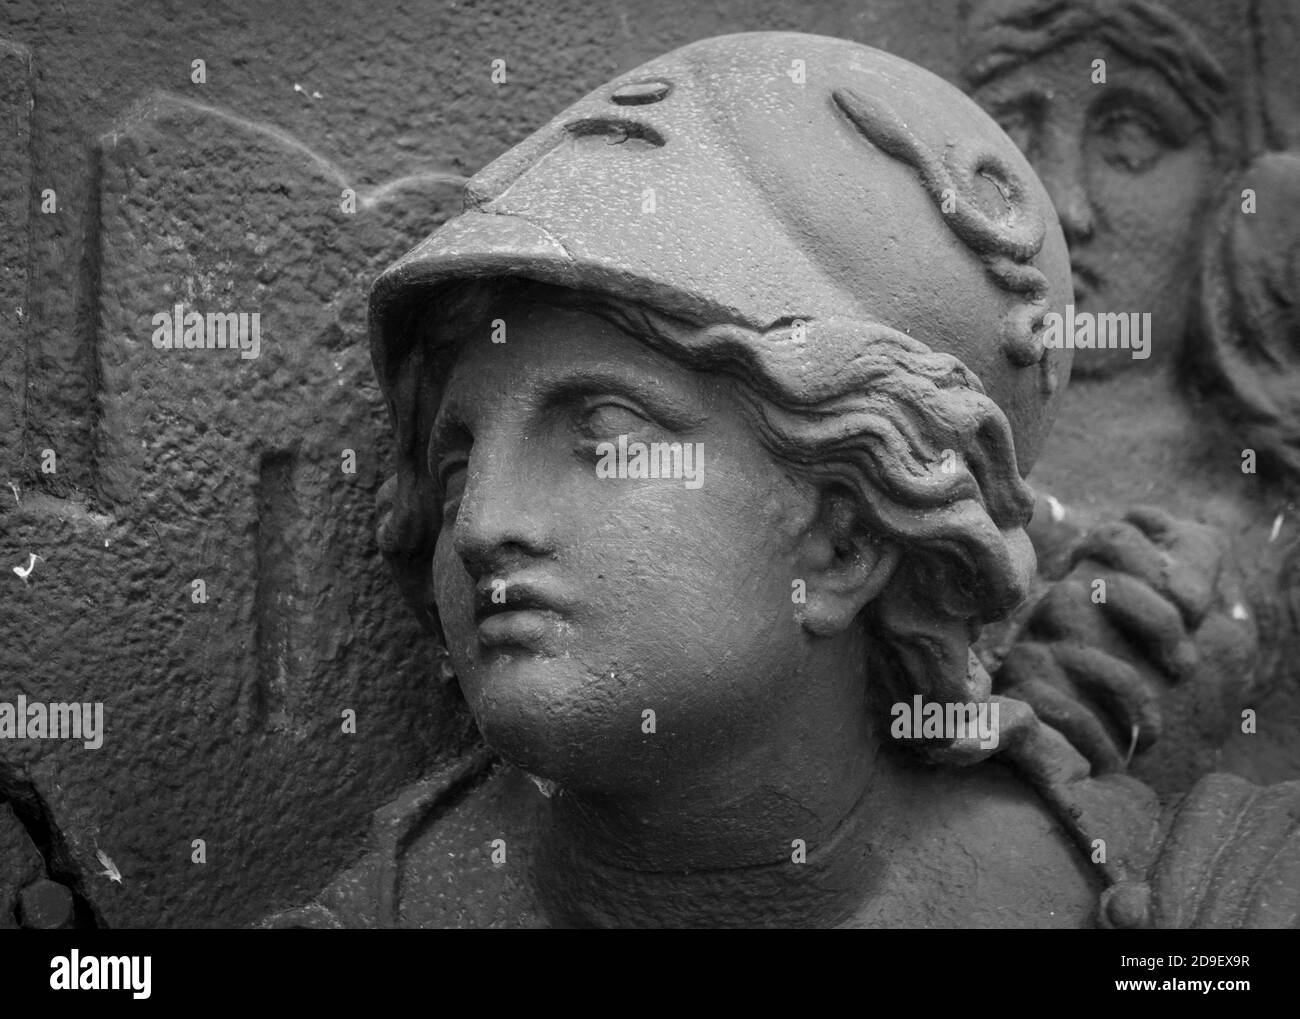 Athena the ancient Greek goddess. Woman in helmet classical sculpture Stock Photo